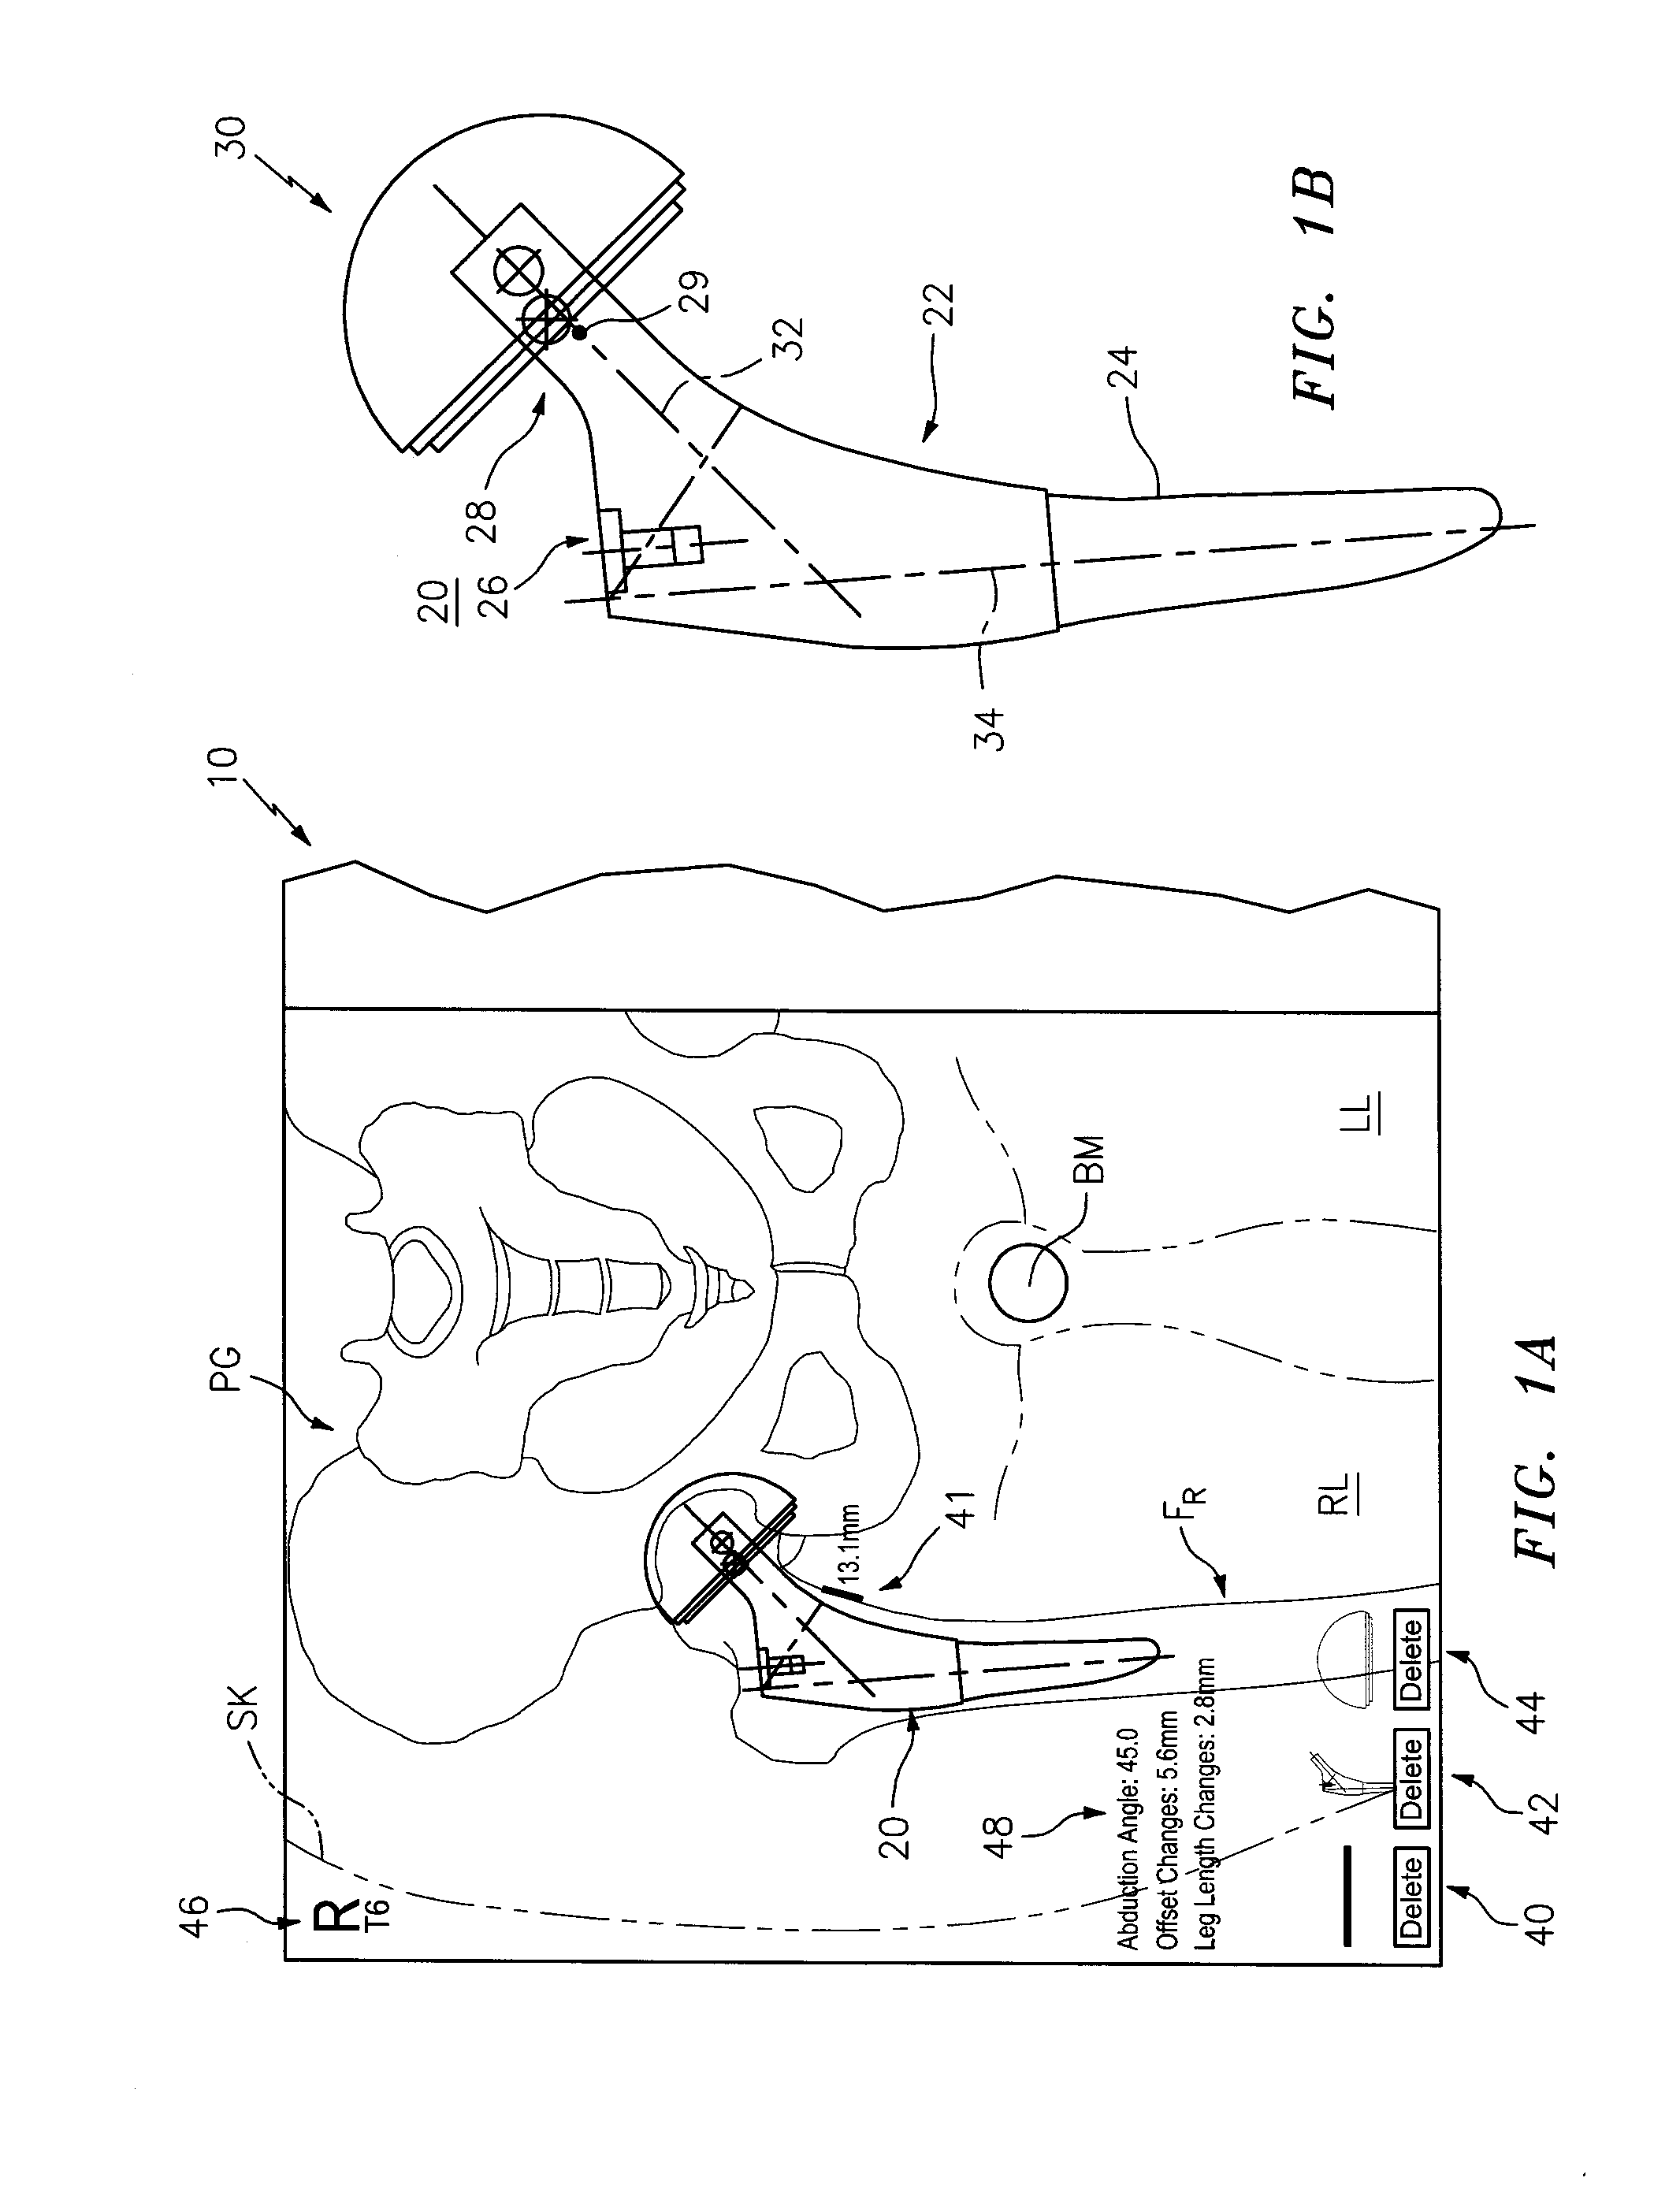 Systems and Methods for Intra-Operative Image Analysis